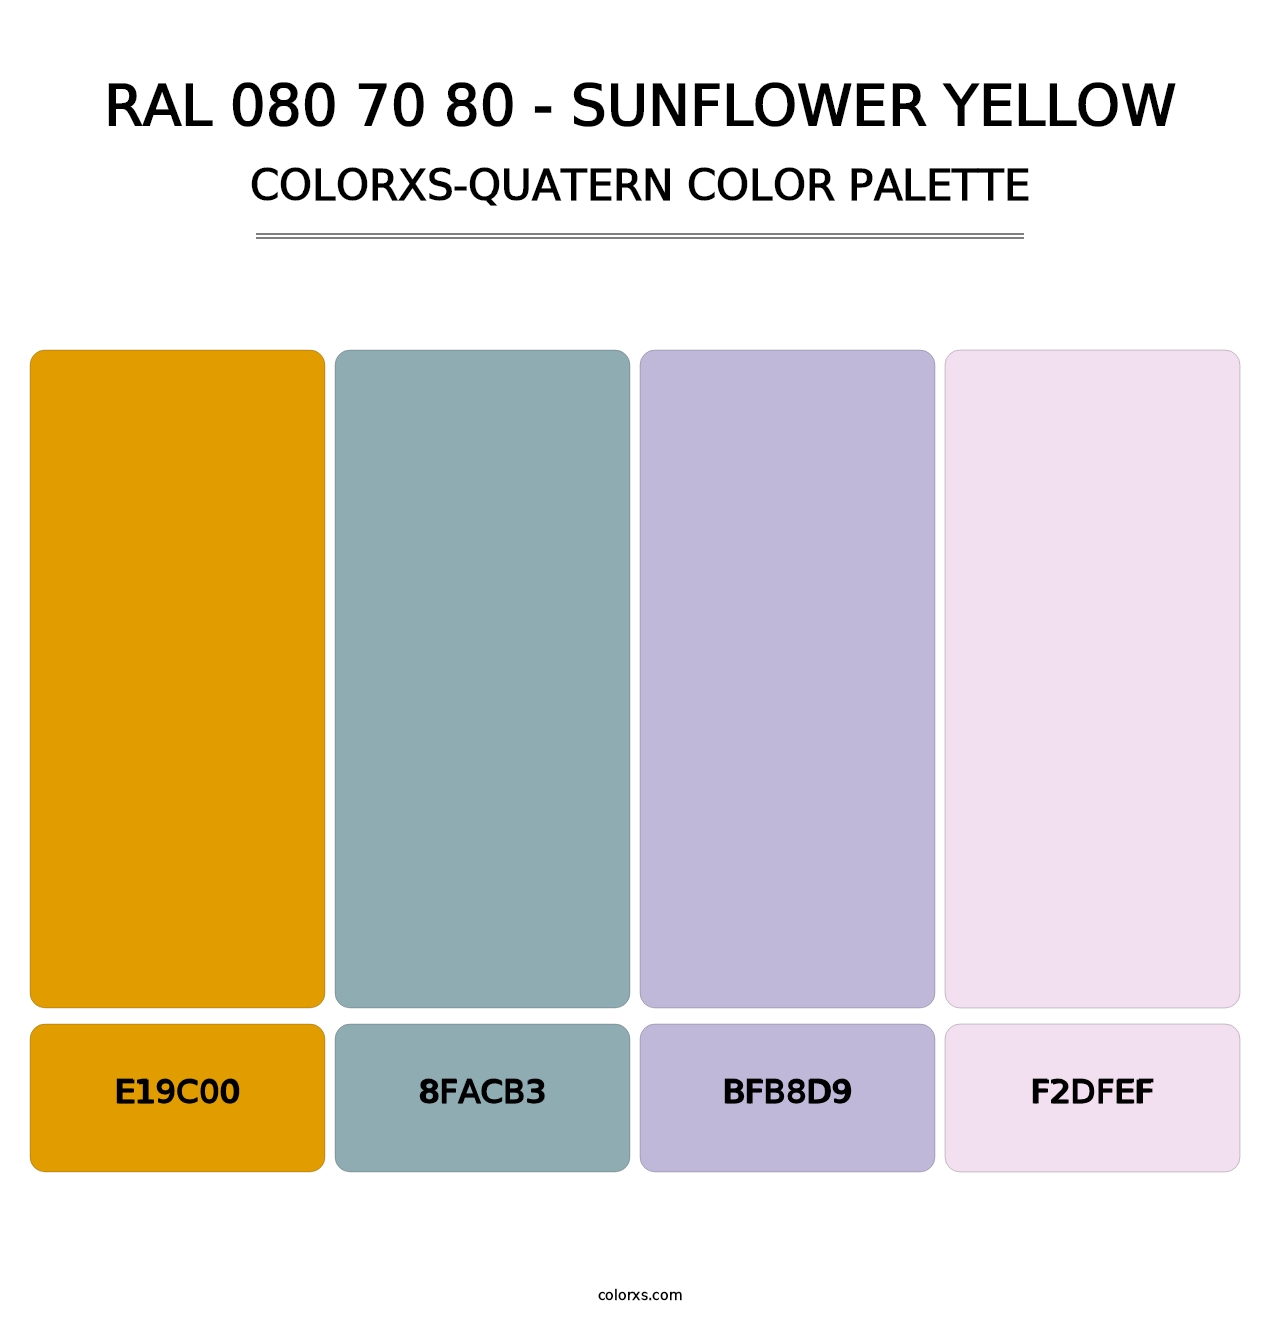 RAL 080 70 80 - Sunflower Yellow - Colorxs Quatern Palette